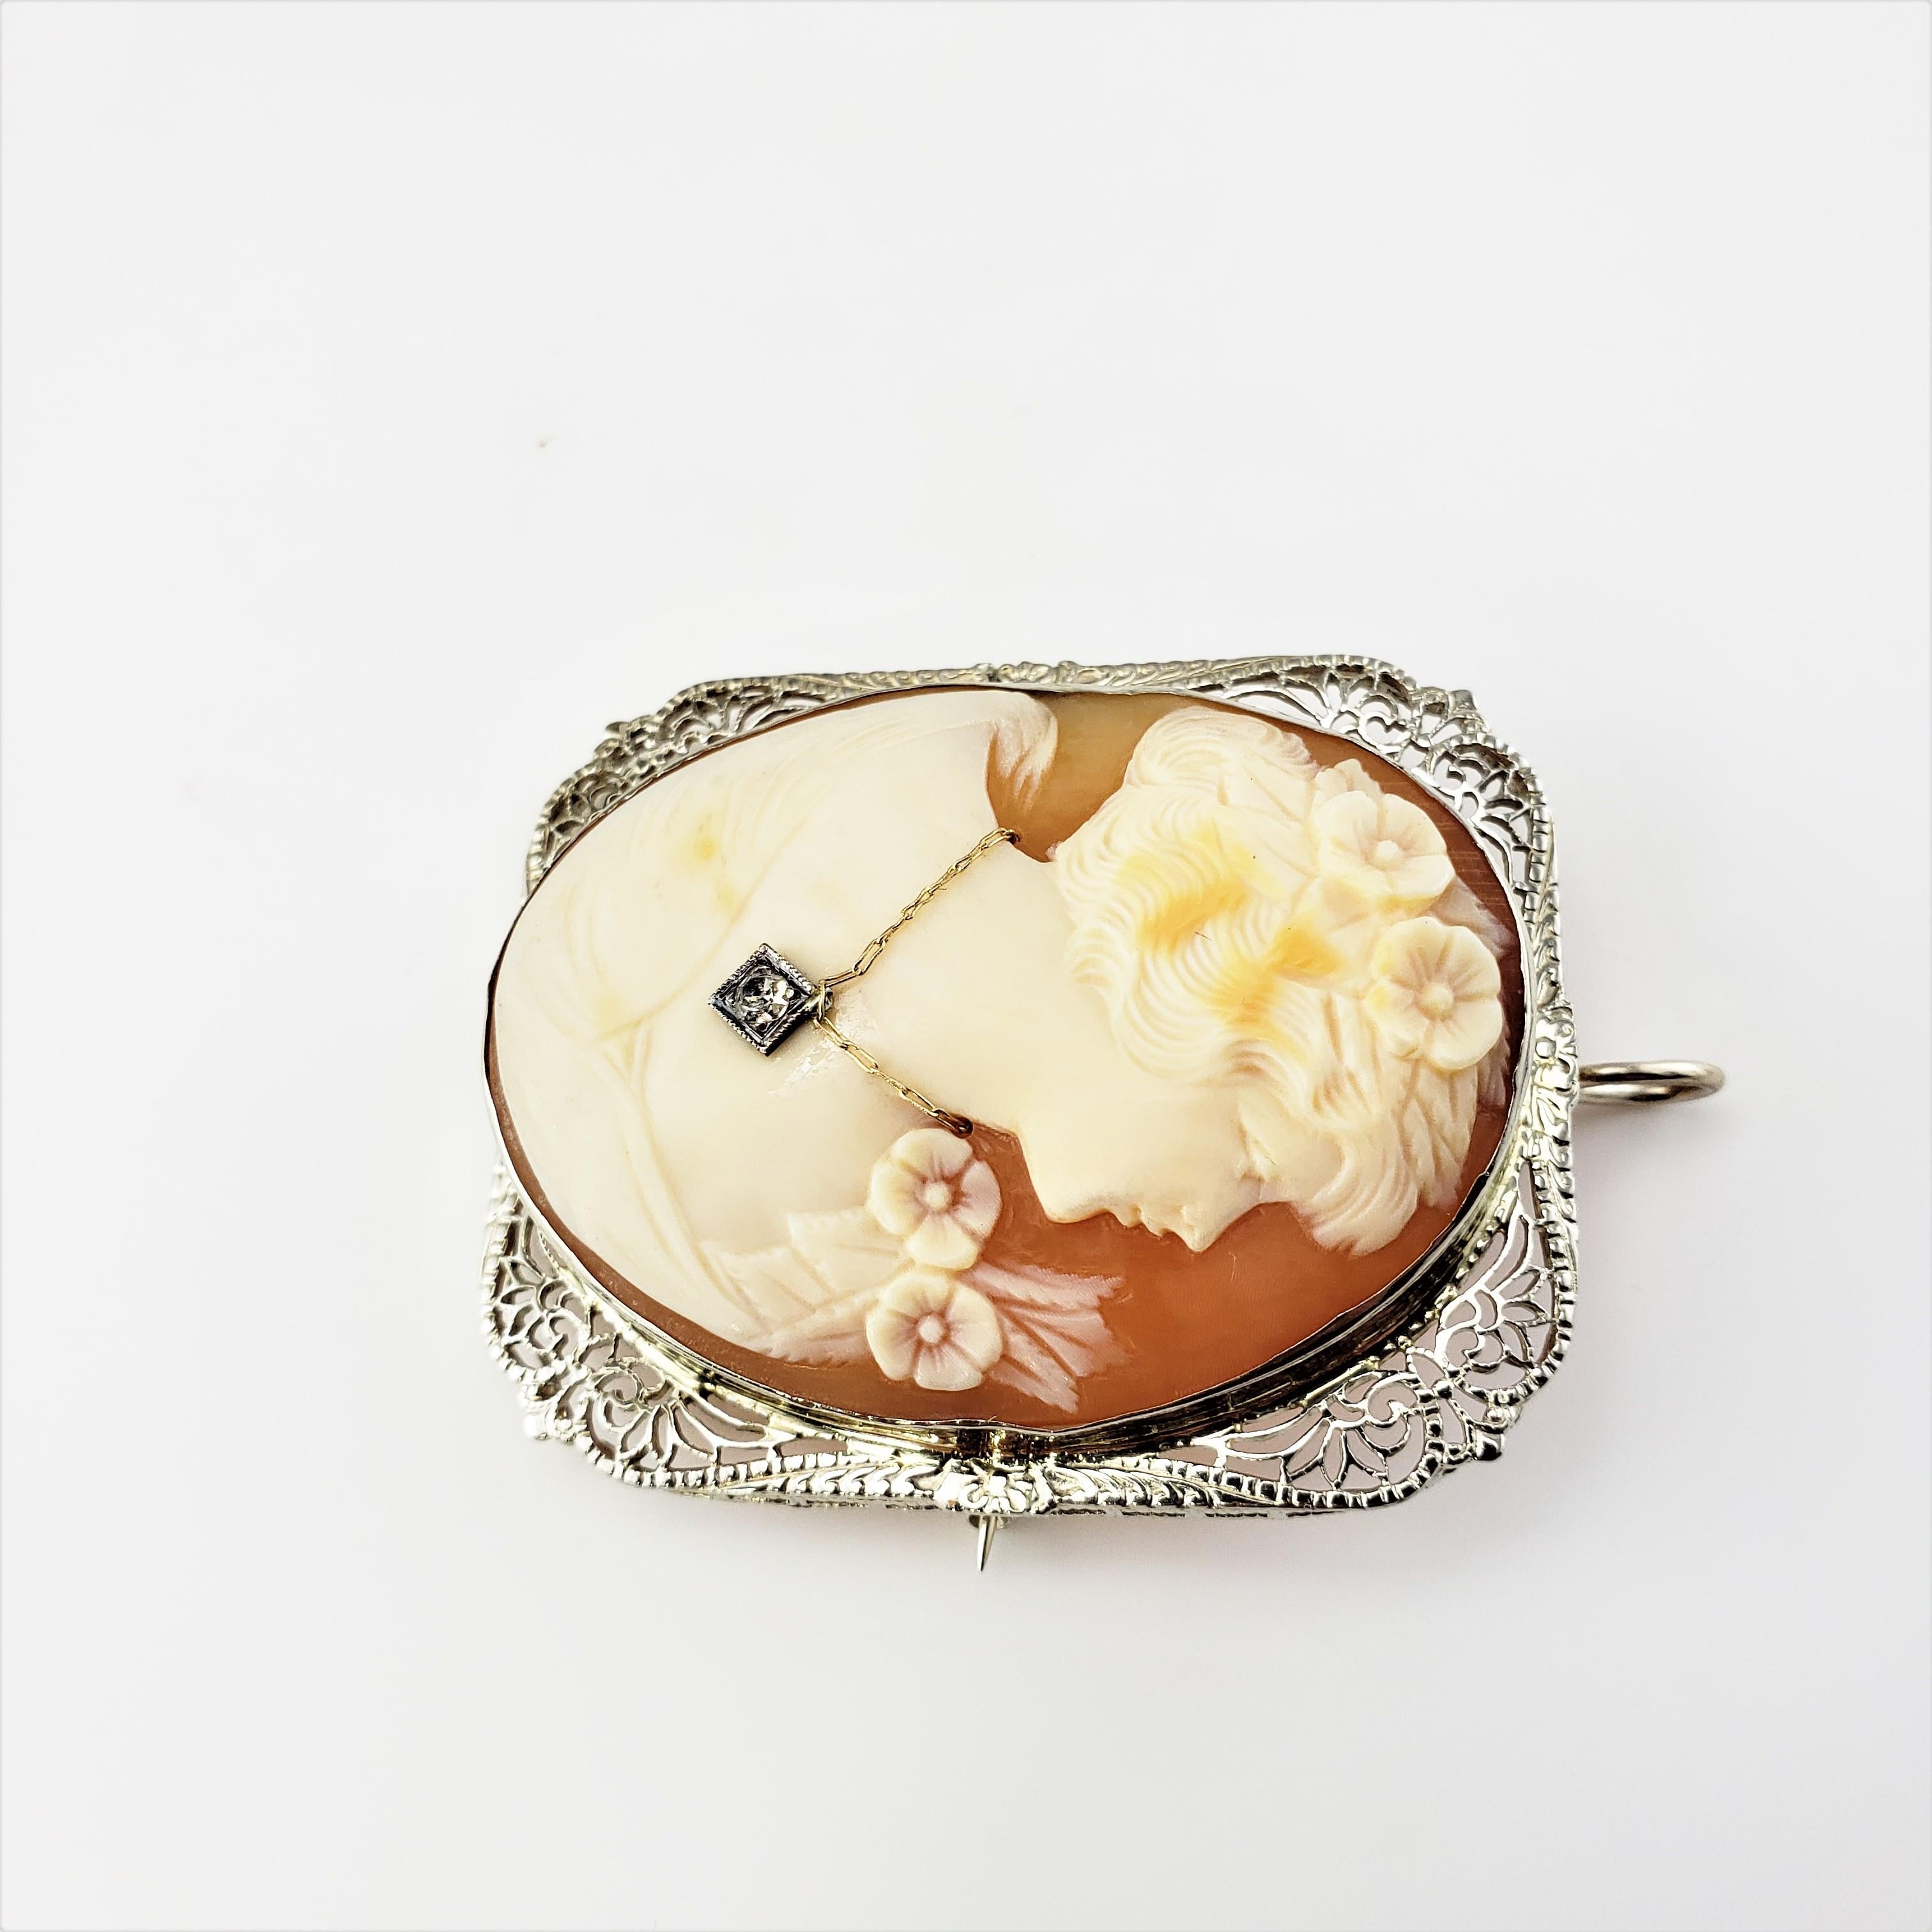 14 Karat White Gold Cameo Brooch Pendant-

This stunning cameo features a lovely lady in profile set in beautifully detailed 14K white gold filigree.  Accented with one round old mine cut diamonds.  Can be worn a brooch or a pendant.

Approximate